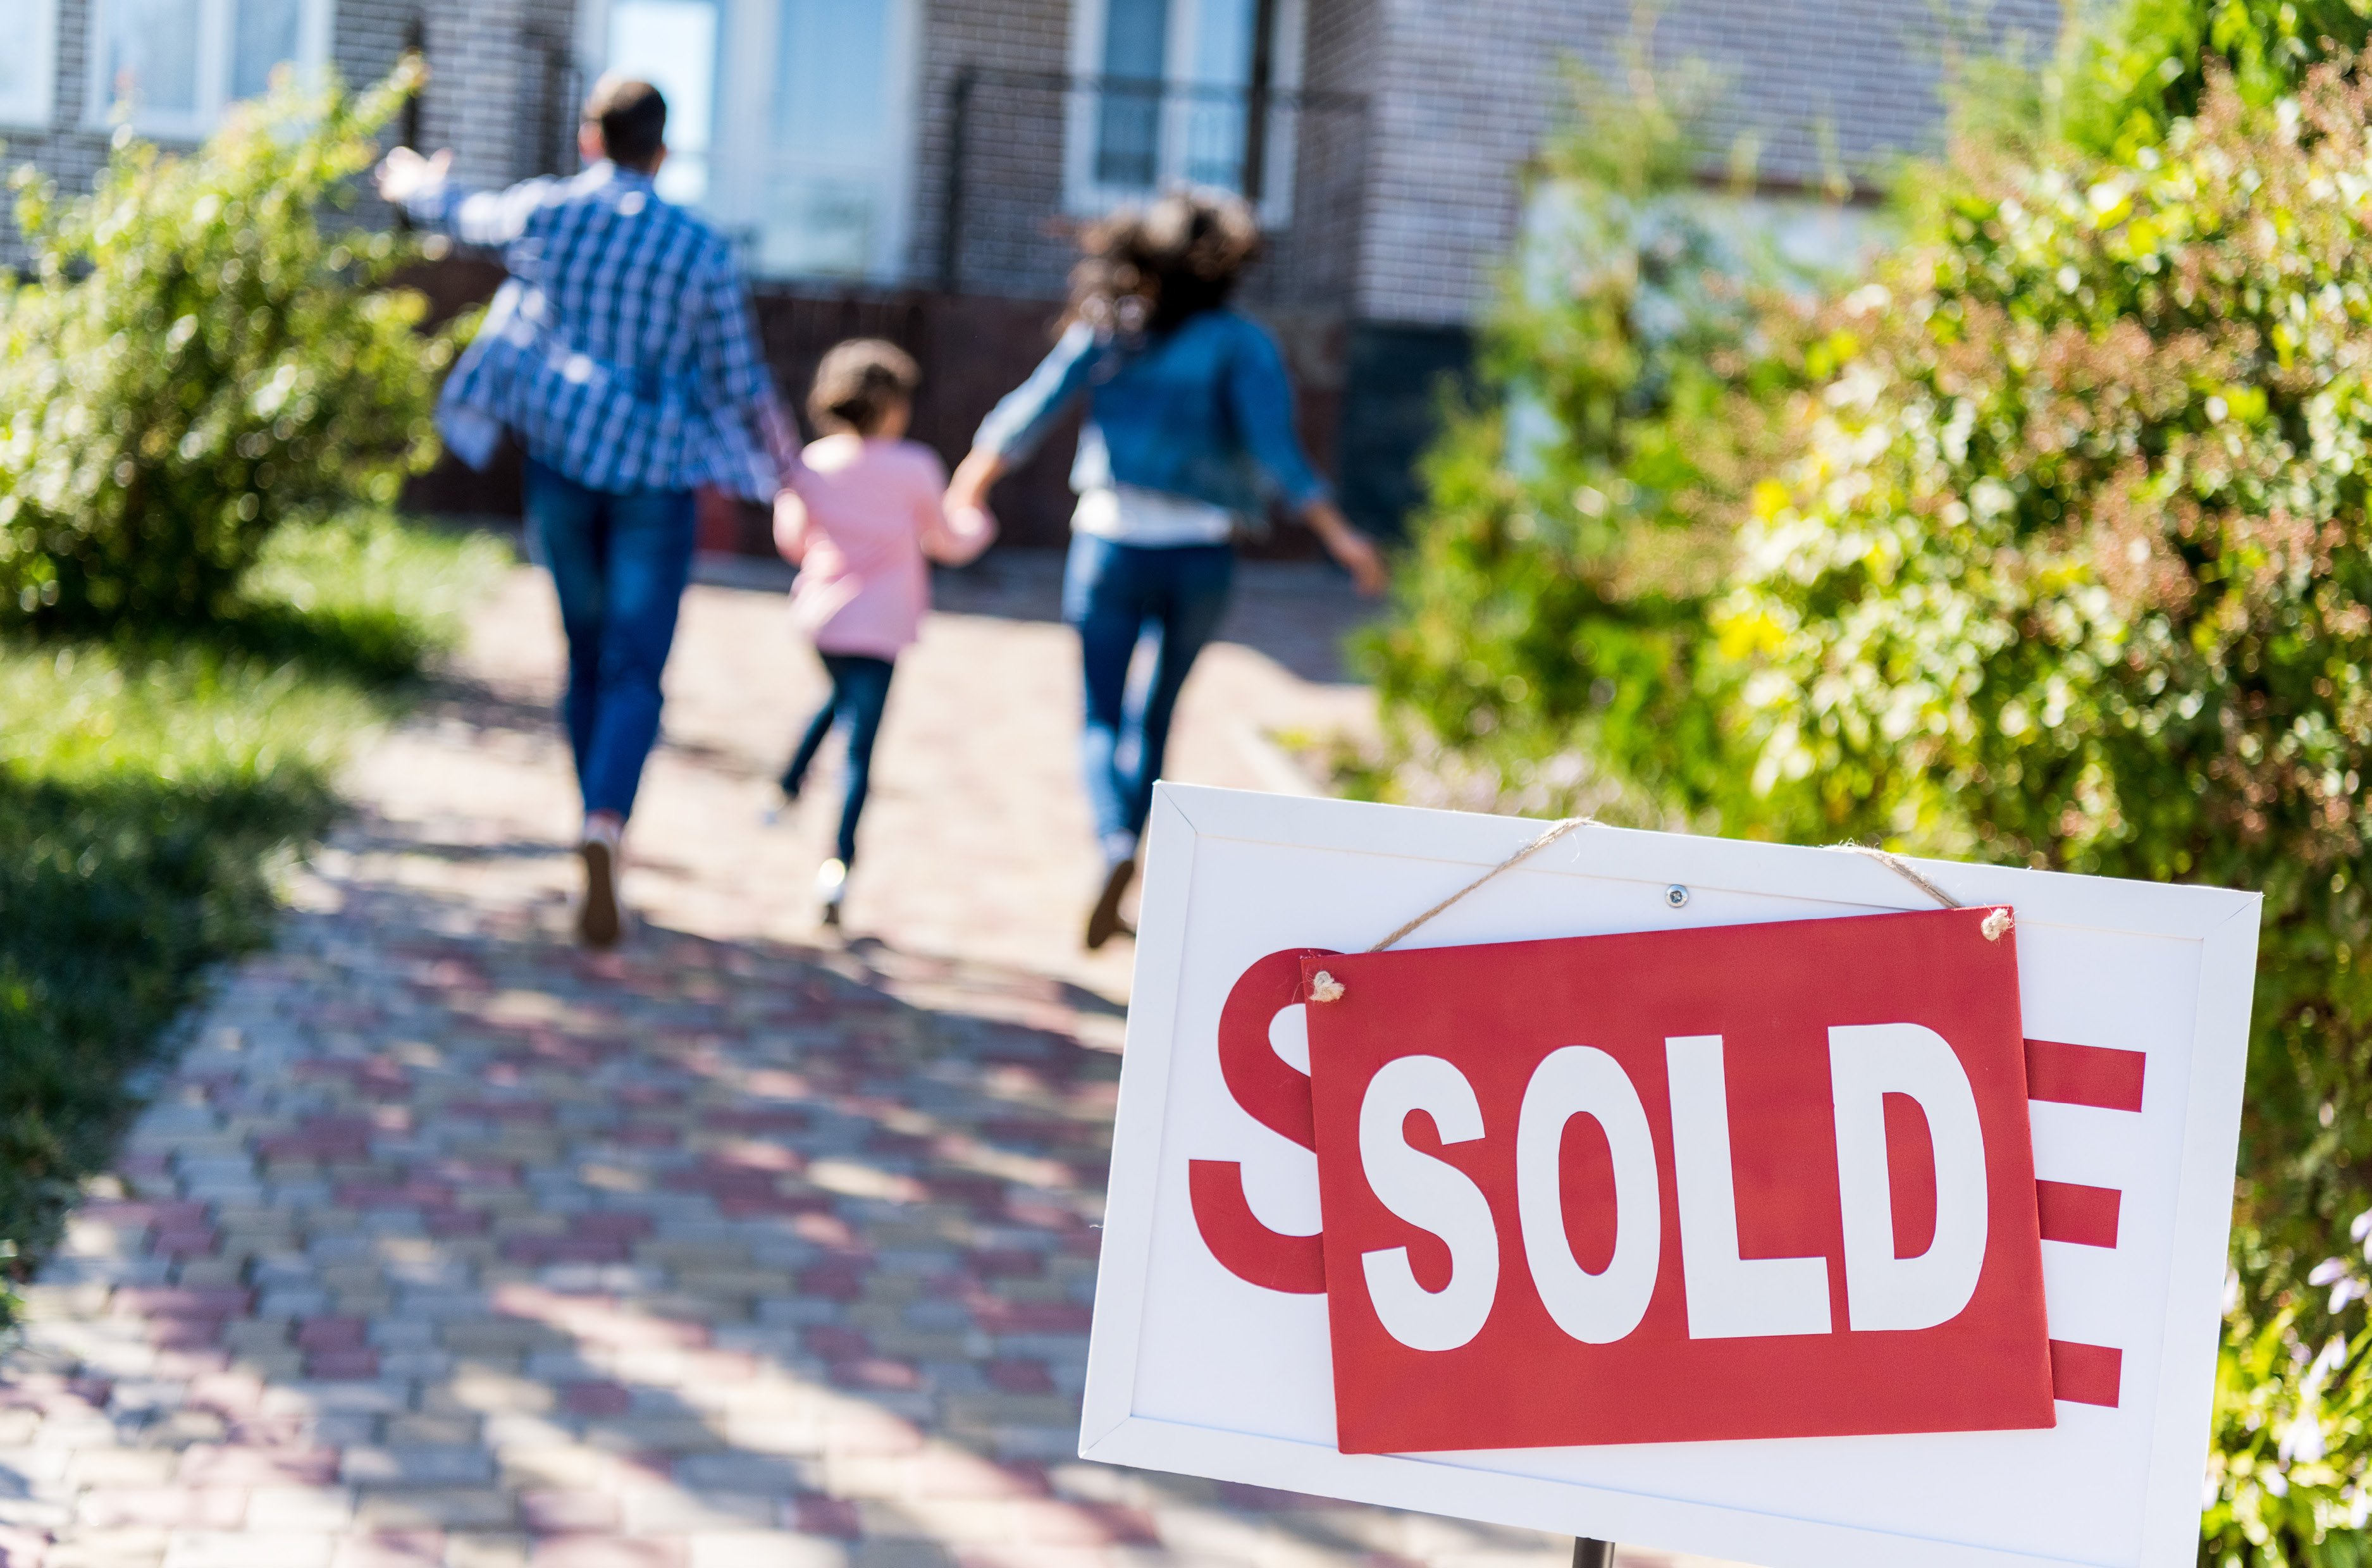 Getting Your Home Ready to Sell